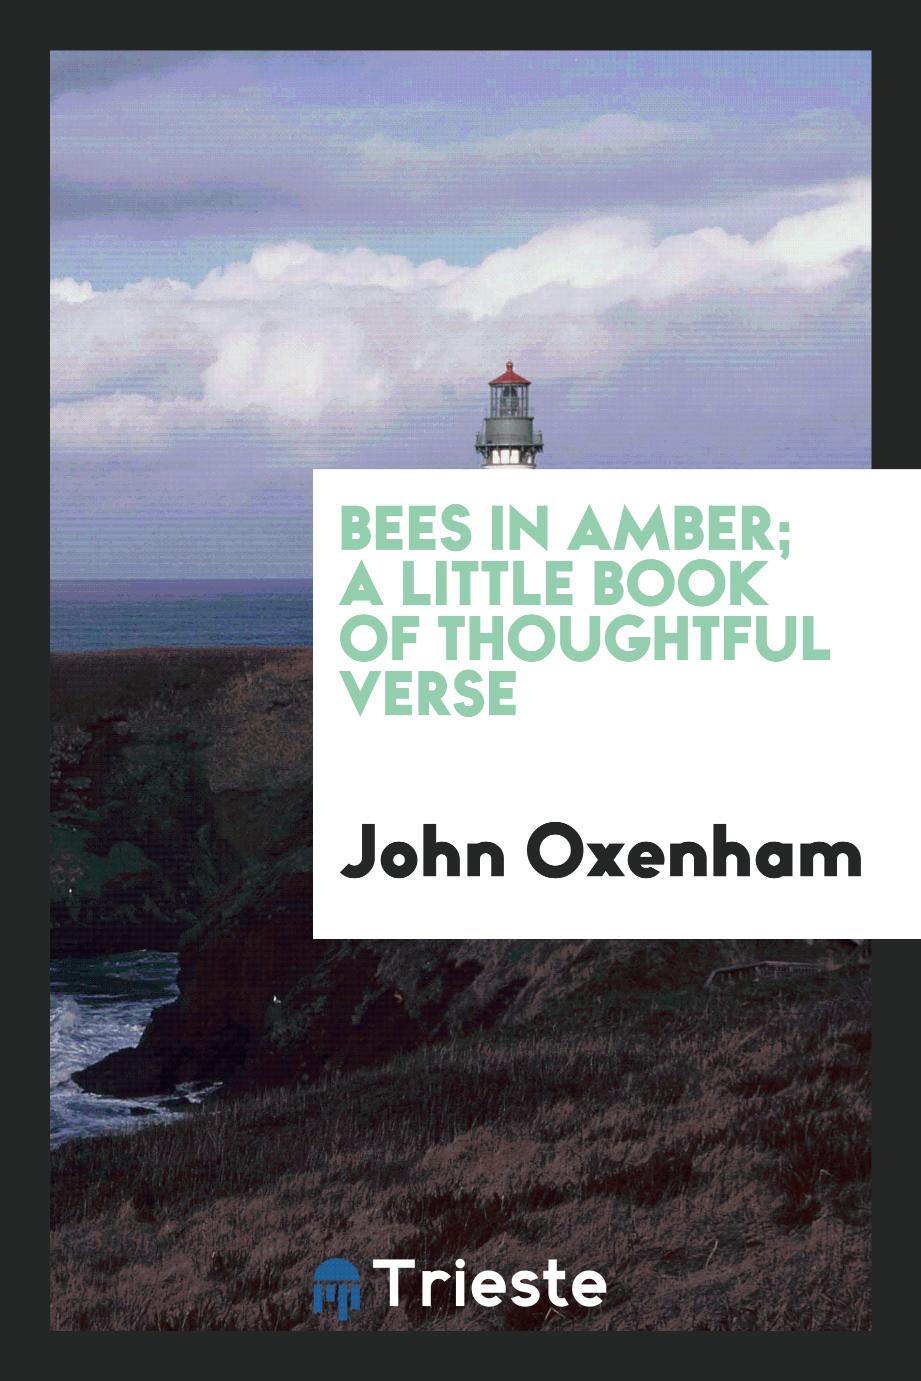 John Oxenham - Bees in amber; a little book of thoughtful verse